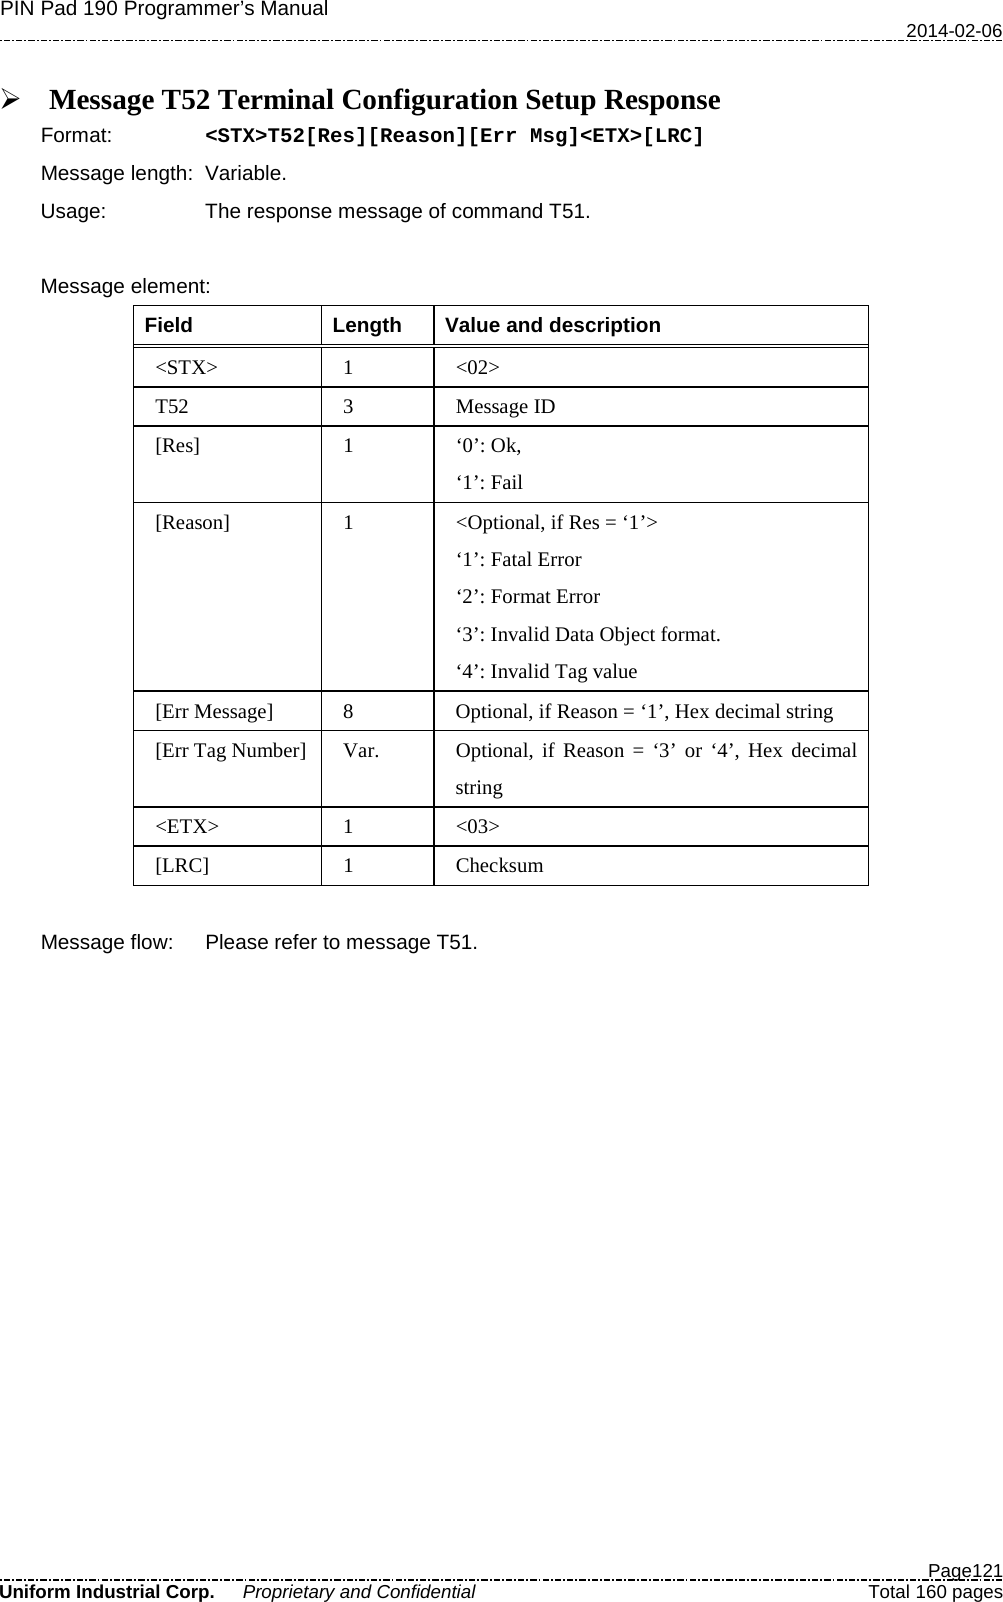 PIN Pad 190 Programmer’s Manual   2014-02-06  Page121 Uniform Industrial Corp. Proprietary and Confidential  Total 160 pages   Message T52 Terminal Configuration Setup Response Format:   &lt;STX&gt;T52[Res][Reason][Err Msg]&lt;ETX&gt;[LRC] Message length: Variable. Usage: The response message of command T51.    Message element:   Field  Length  Value and description &lt;STX&gt;  1  &lt;02&gt; T52  3  Message ID [Res]  1  ‘0’: Ok, ‘1’: Fail [Reason]  1  &lt;Optional, if Res = ‘1’&gt; ‘1’: Fatal Error ‘2’: Format Error ‘3’: Invalid Data Object format. ‘4’: Invalid Tag value [Err Message]  8  Optional, if Reason = ‘1’, Hex decimal string [Err Tag Number]  Var. Optional, if Reason = ‘3’ or ‘4’, Hex decimal string &lt;ETX&gt;  1  &lt;03&gt; [LRC]  1  Checksum  Message flow: Please refer to message T51. 